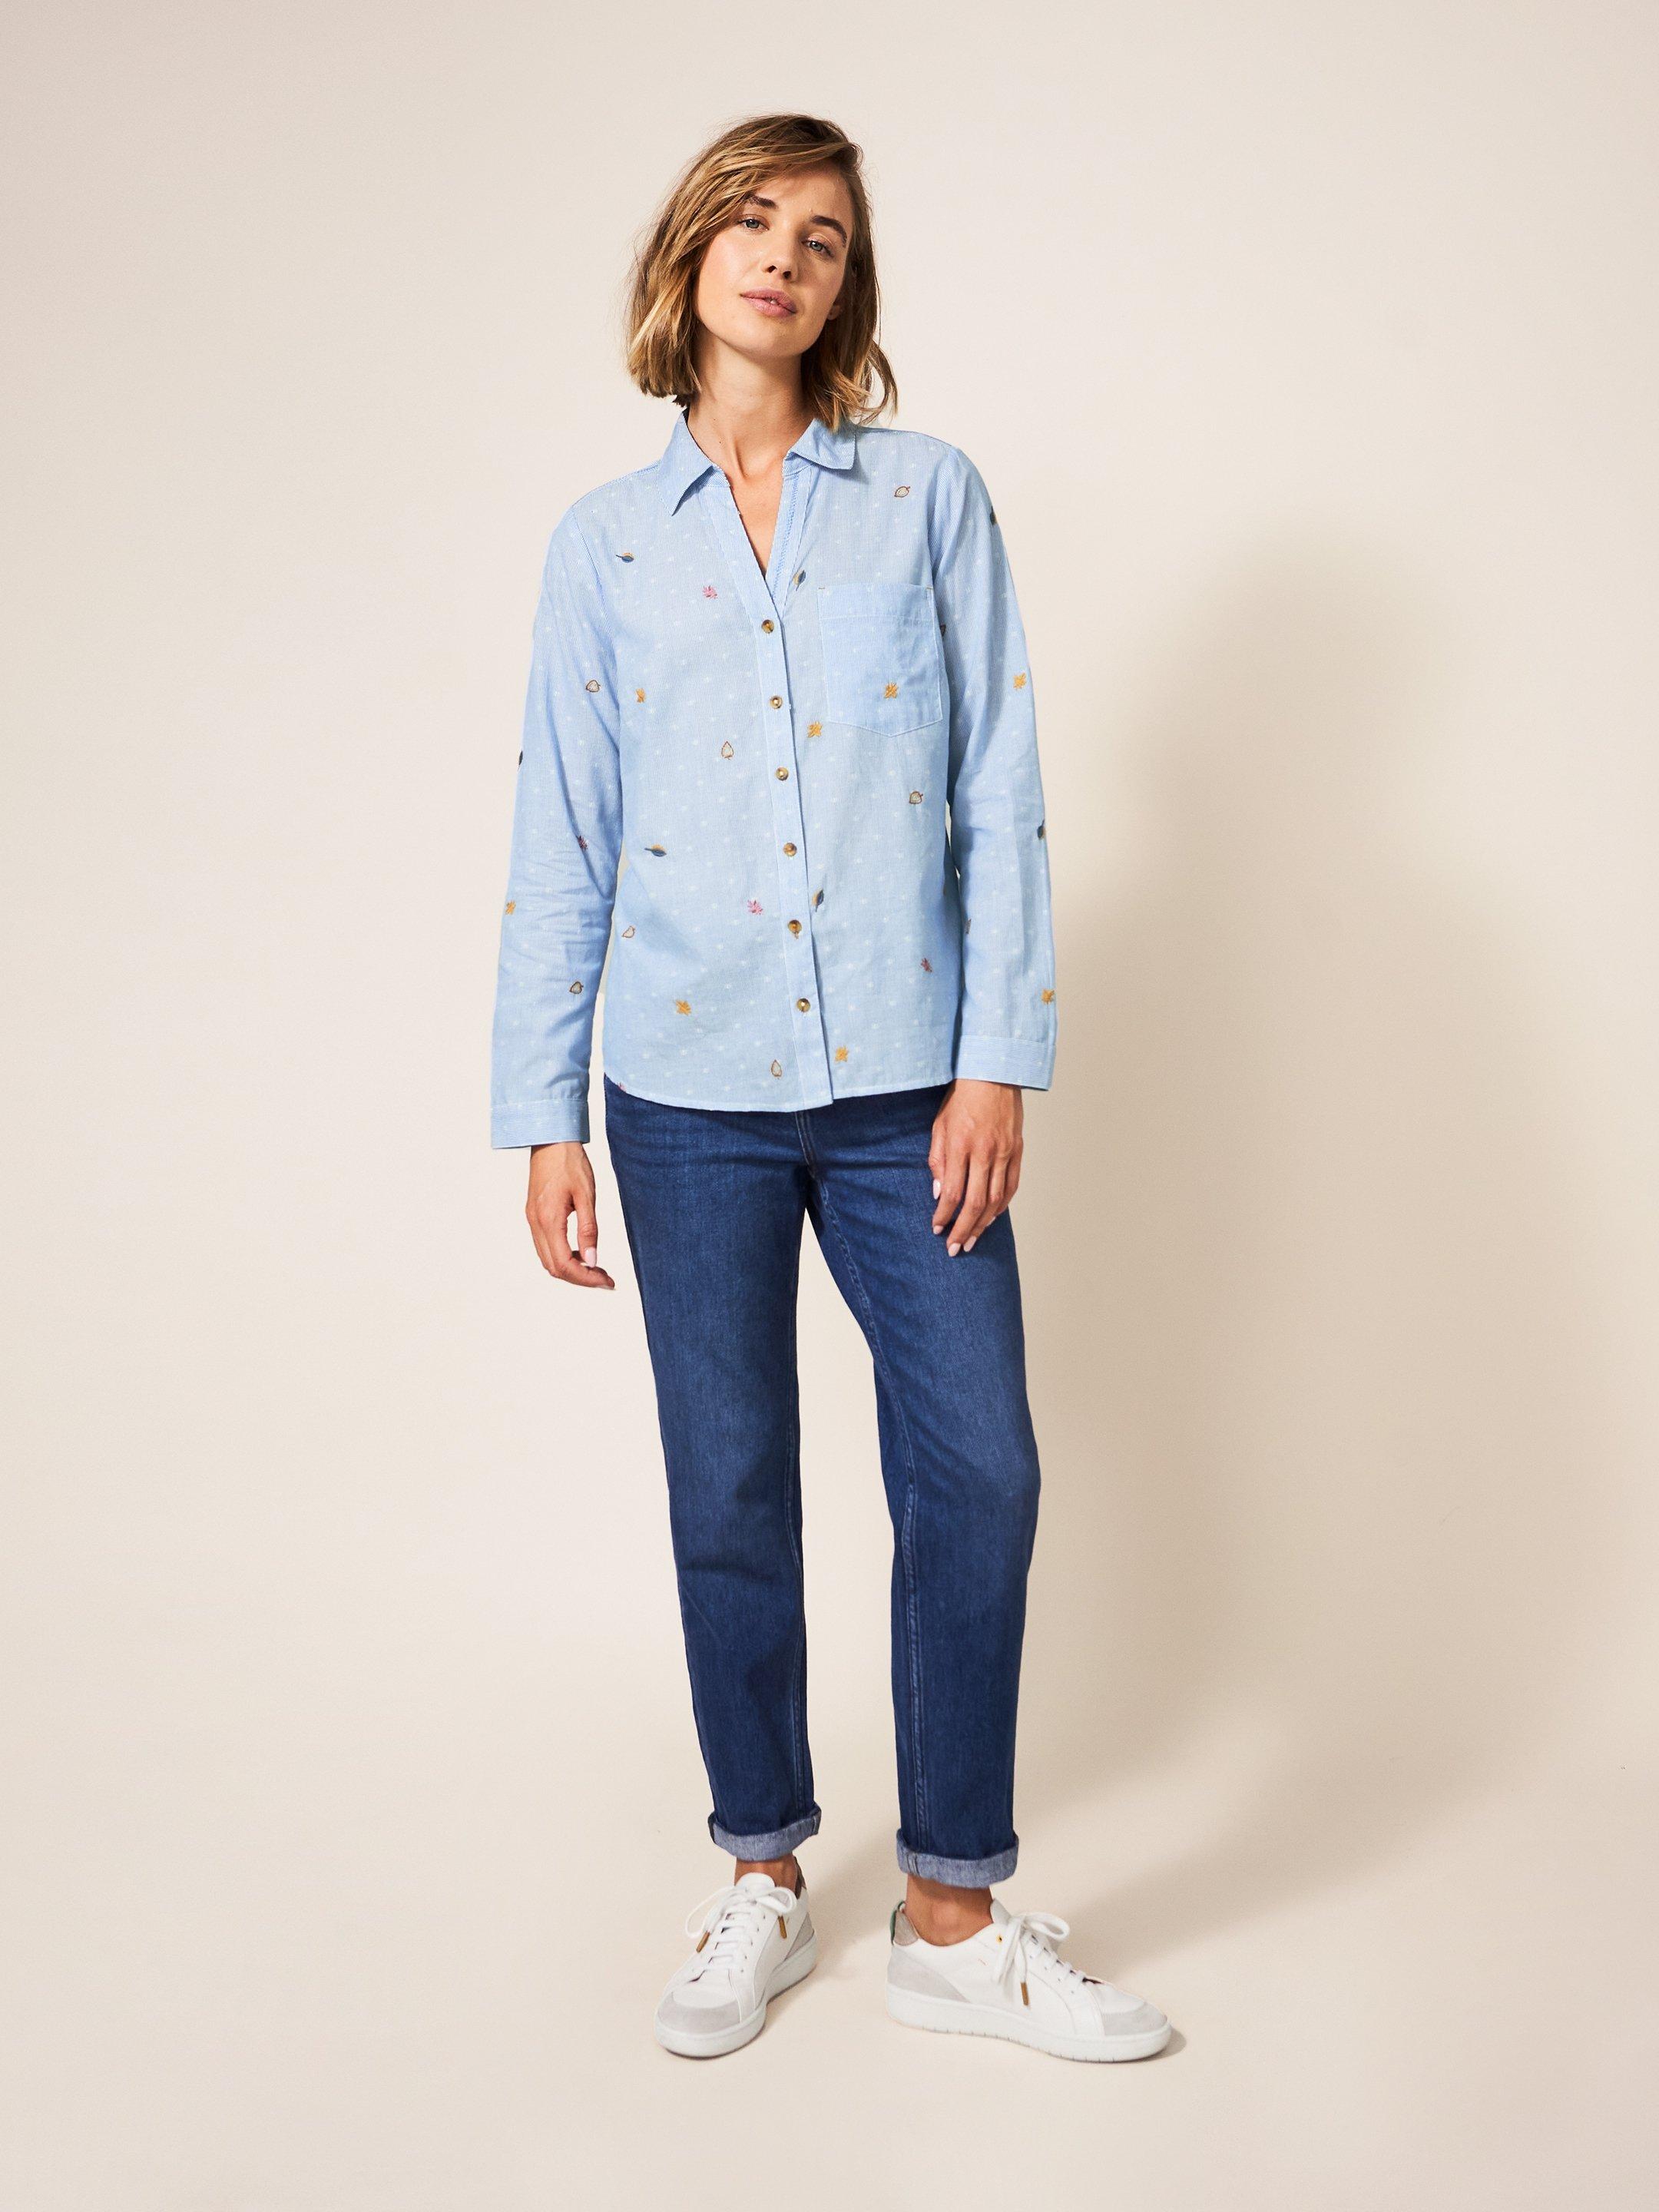 Maple Embroidered Shirt in BLUE MLT - MODEL FRONT